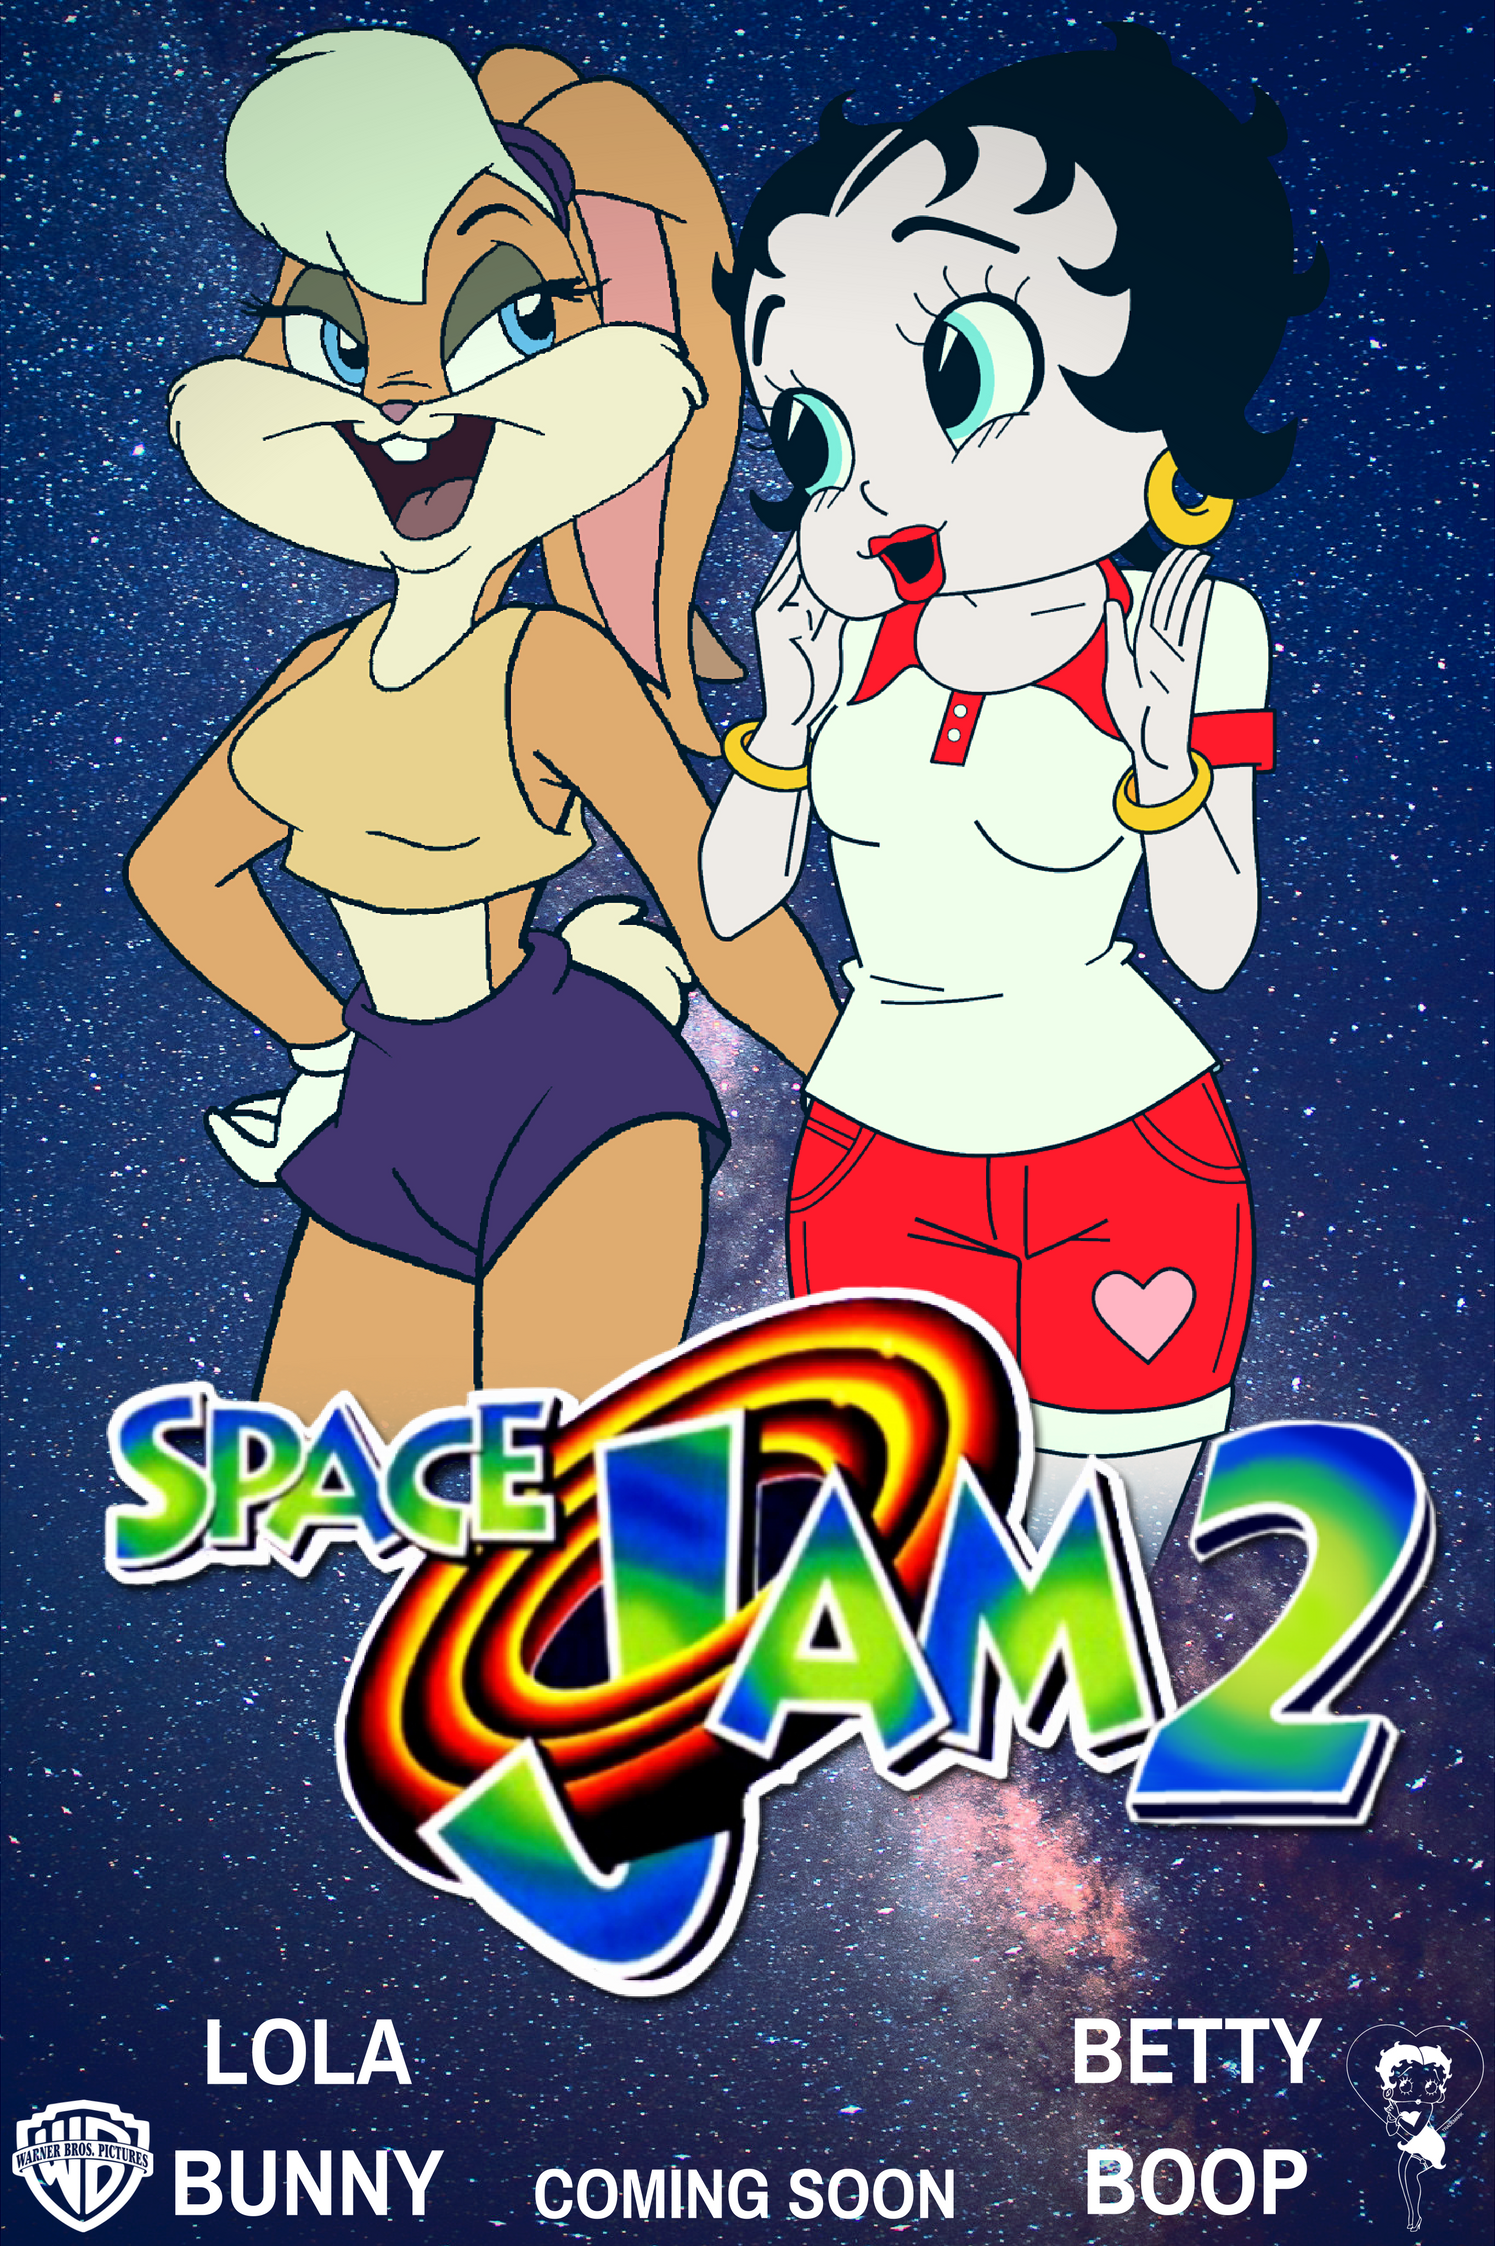 Fan Art of Space Jam 2 Poster 2 for fans of Space Jam. 